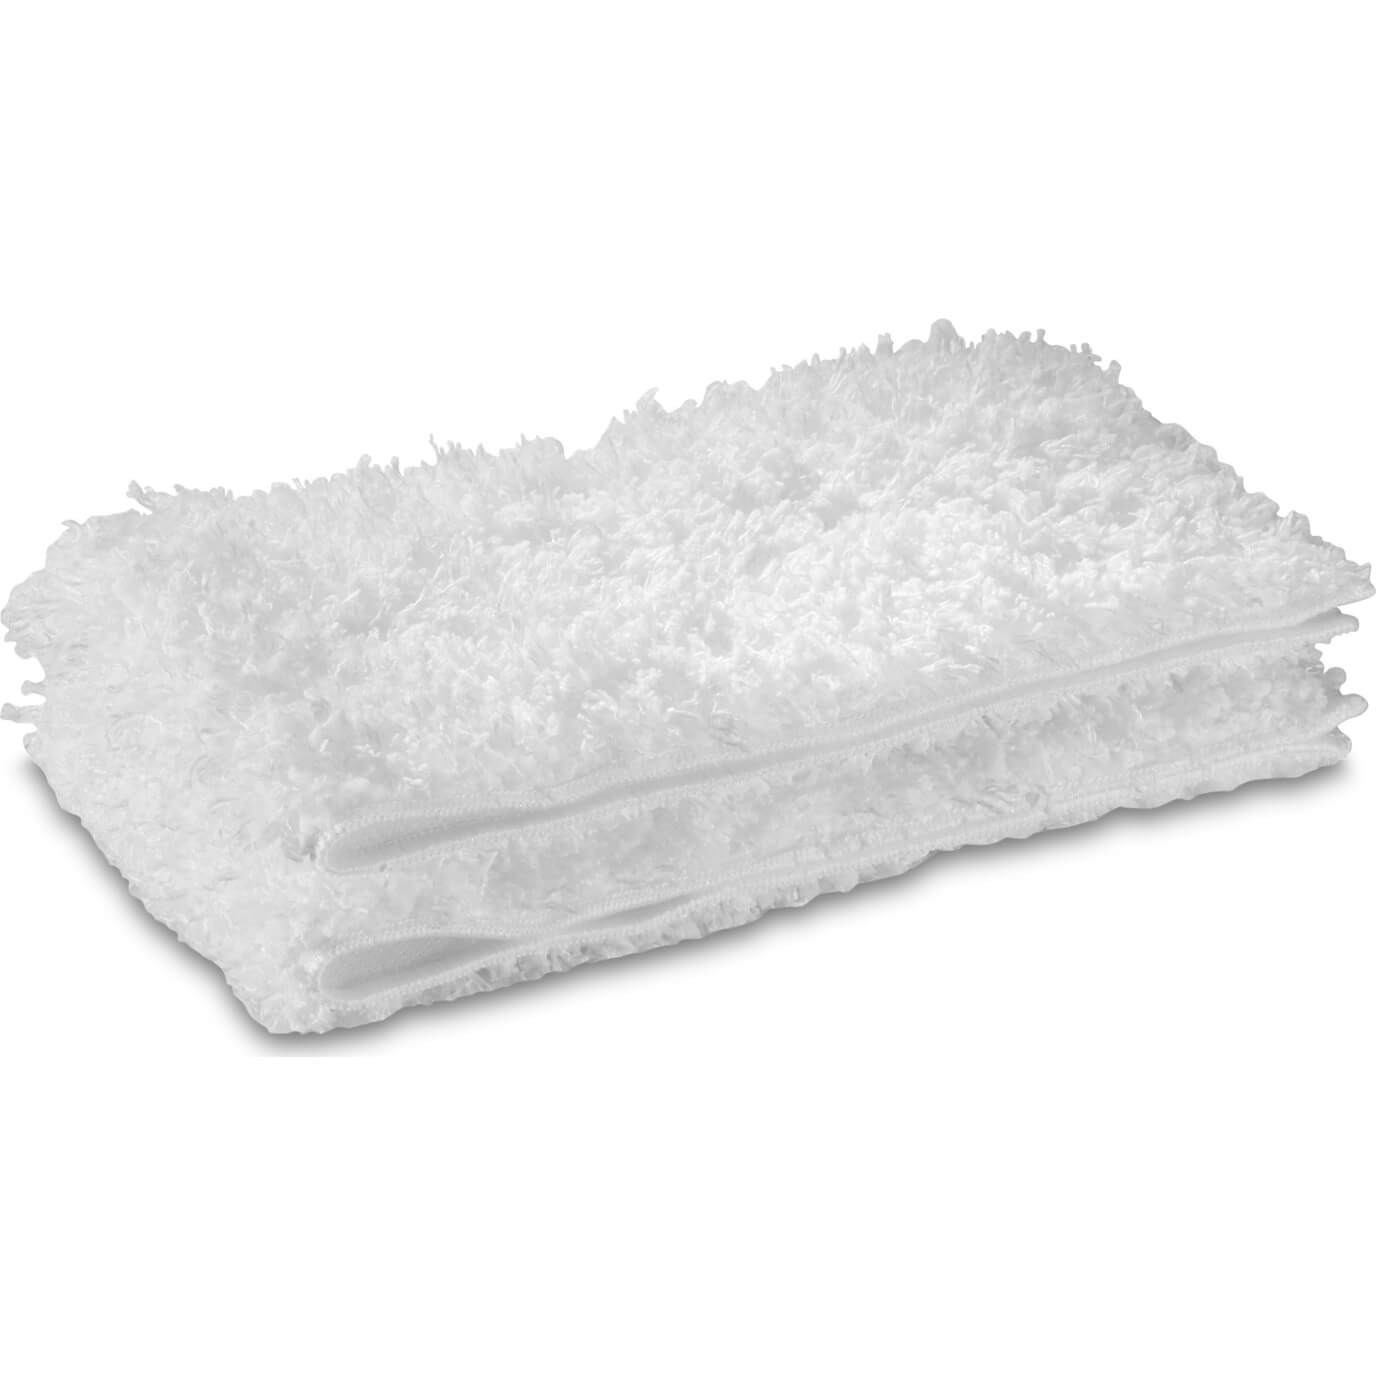 Karcher Soft Comfort Plus Nozzle Floor Cloths for SC Steam Cleaners Pack of 2